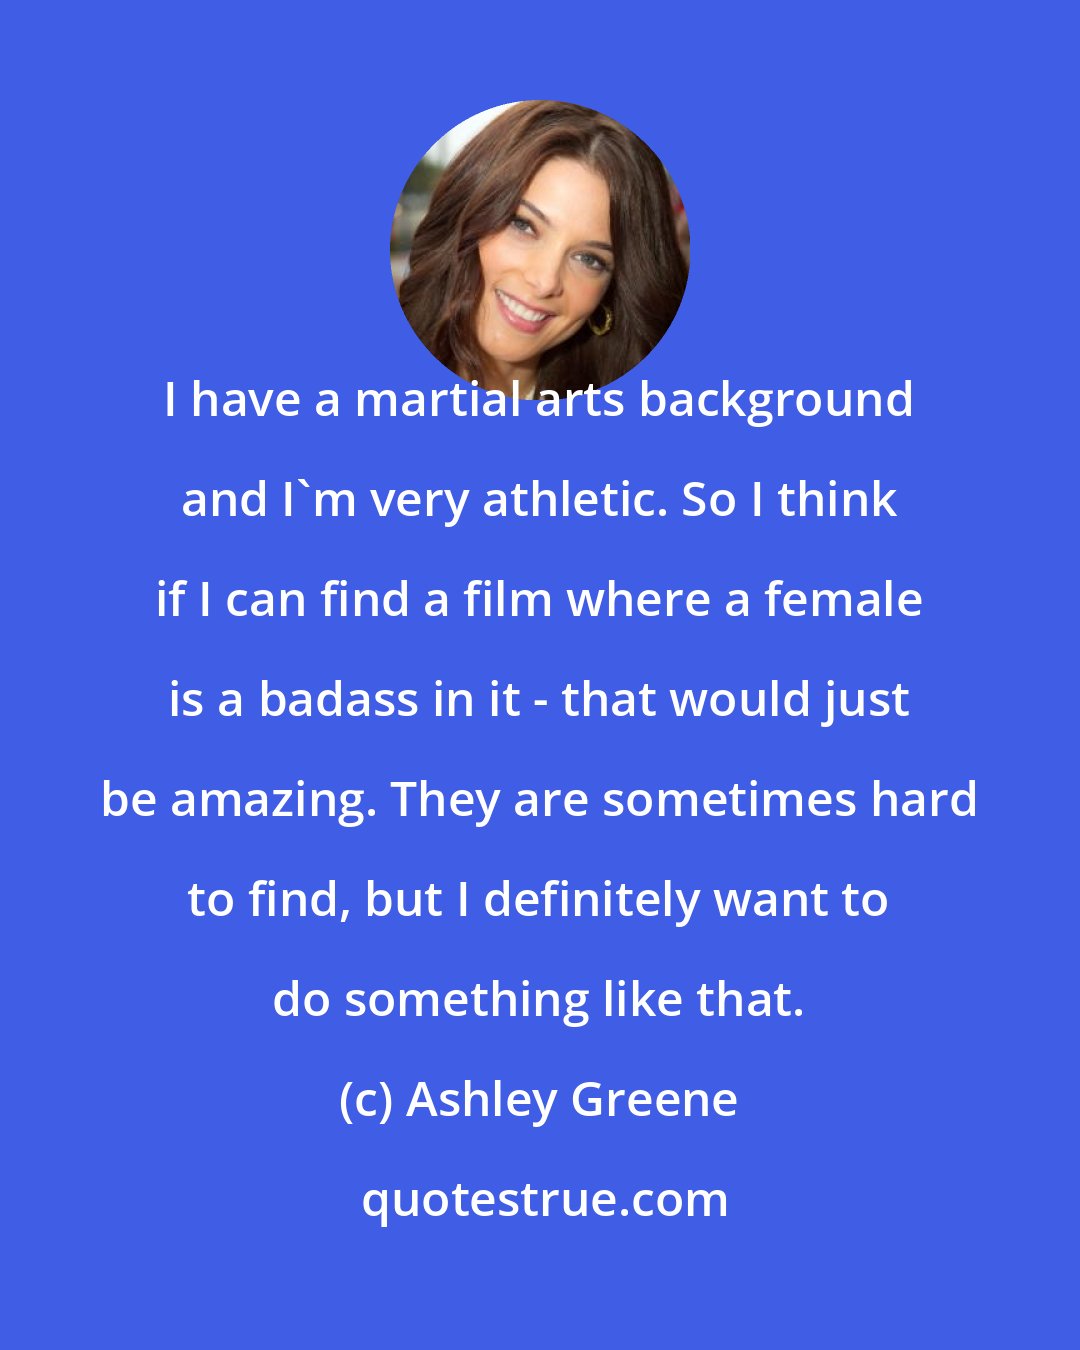 Ashley Greene: I have a martial arts background and I'm very athletic. So I think if I can find a film where a female is a badass in it - that would just be amazing. They are sometimes hard to find, but I definitely want to do something like that.